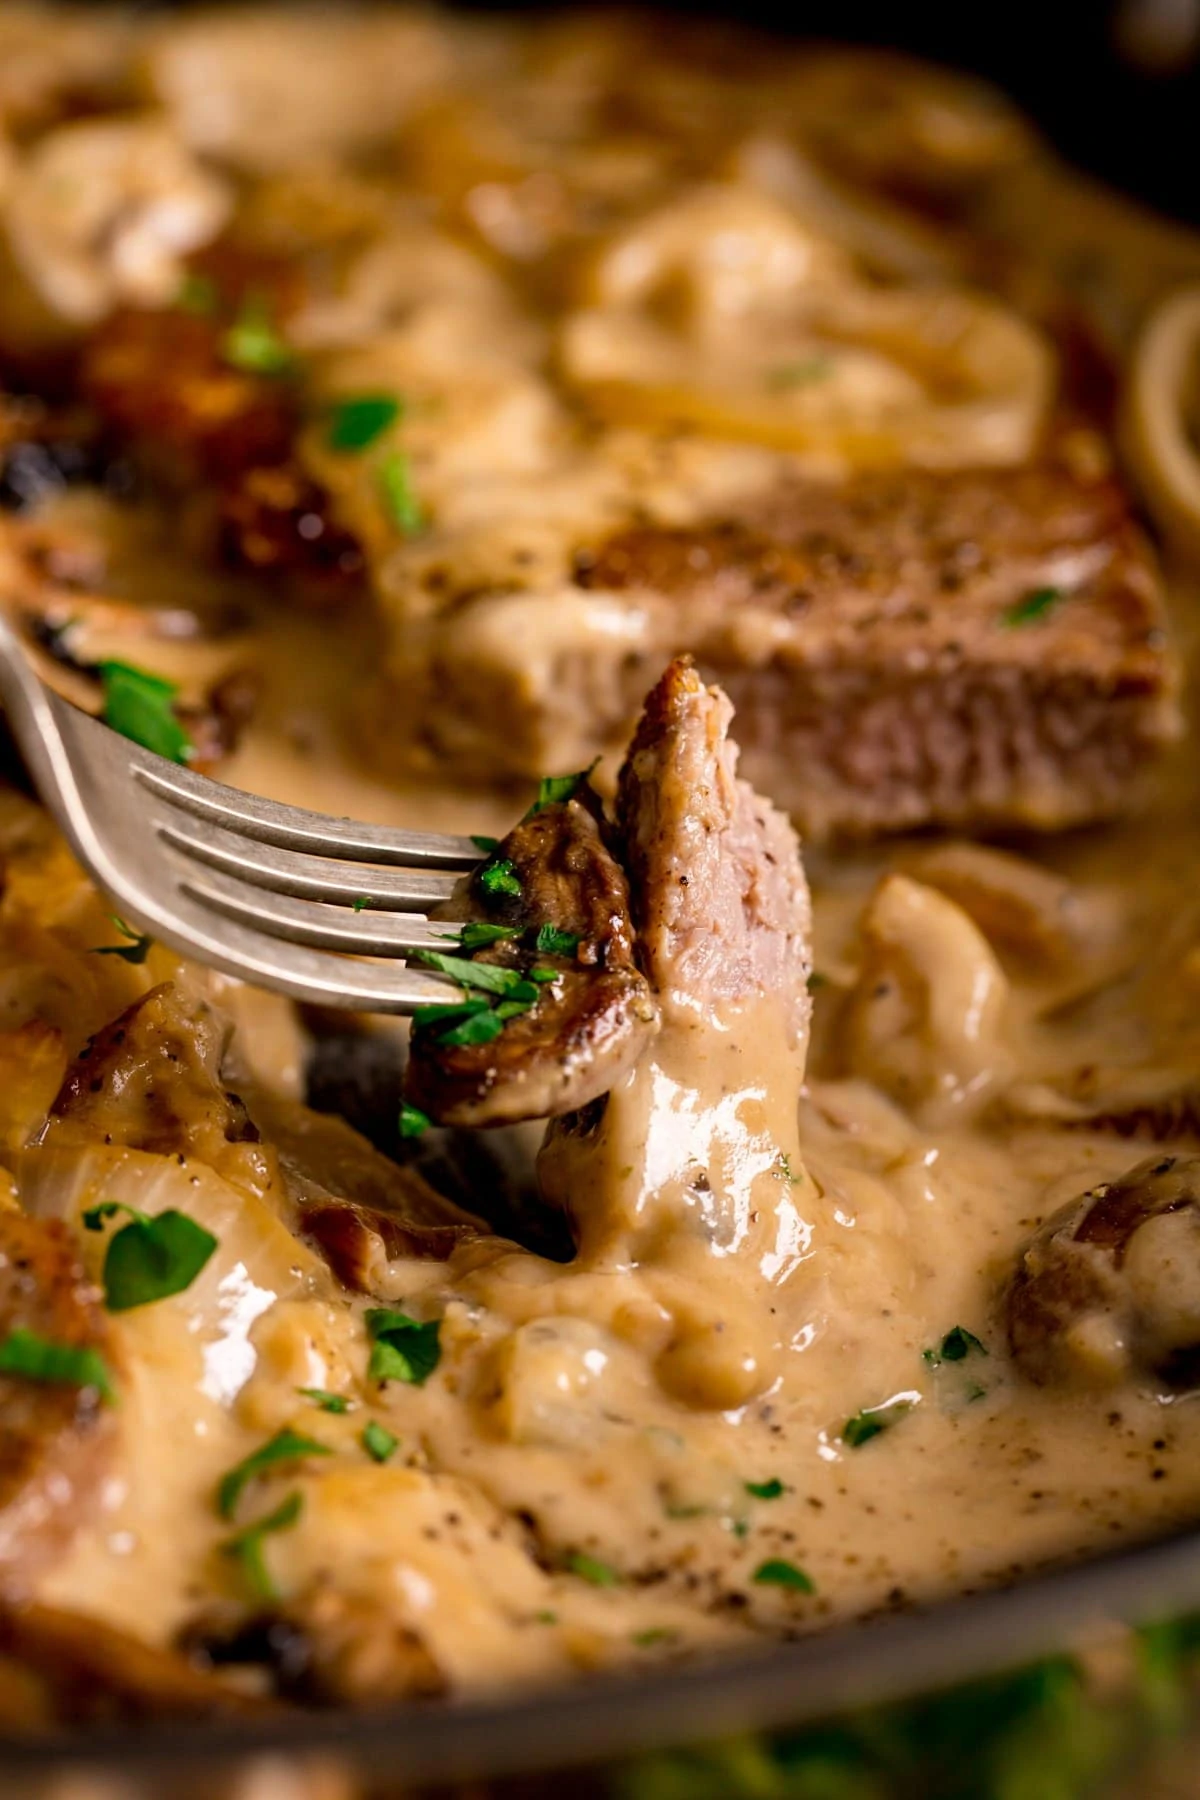 Piece of pork steak being lifted out of creamy sauce with a fork.